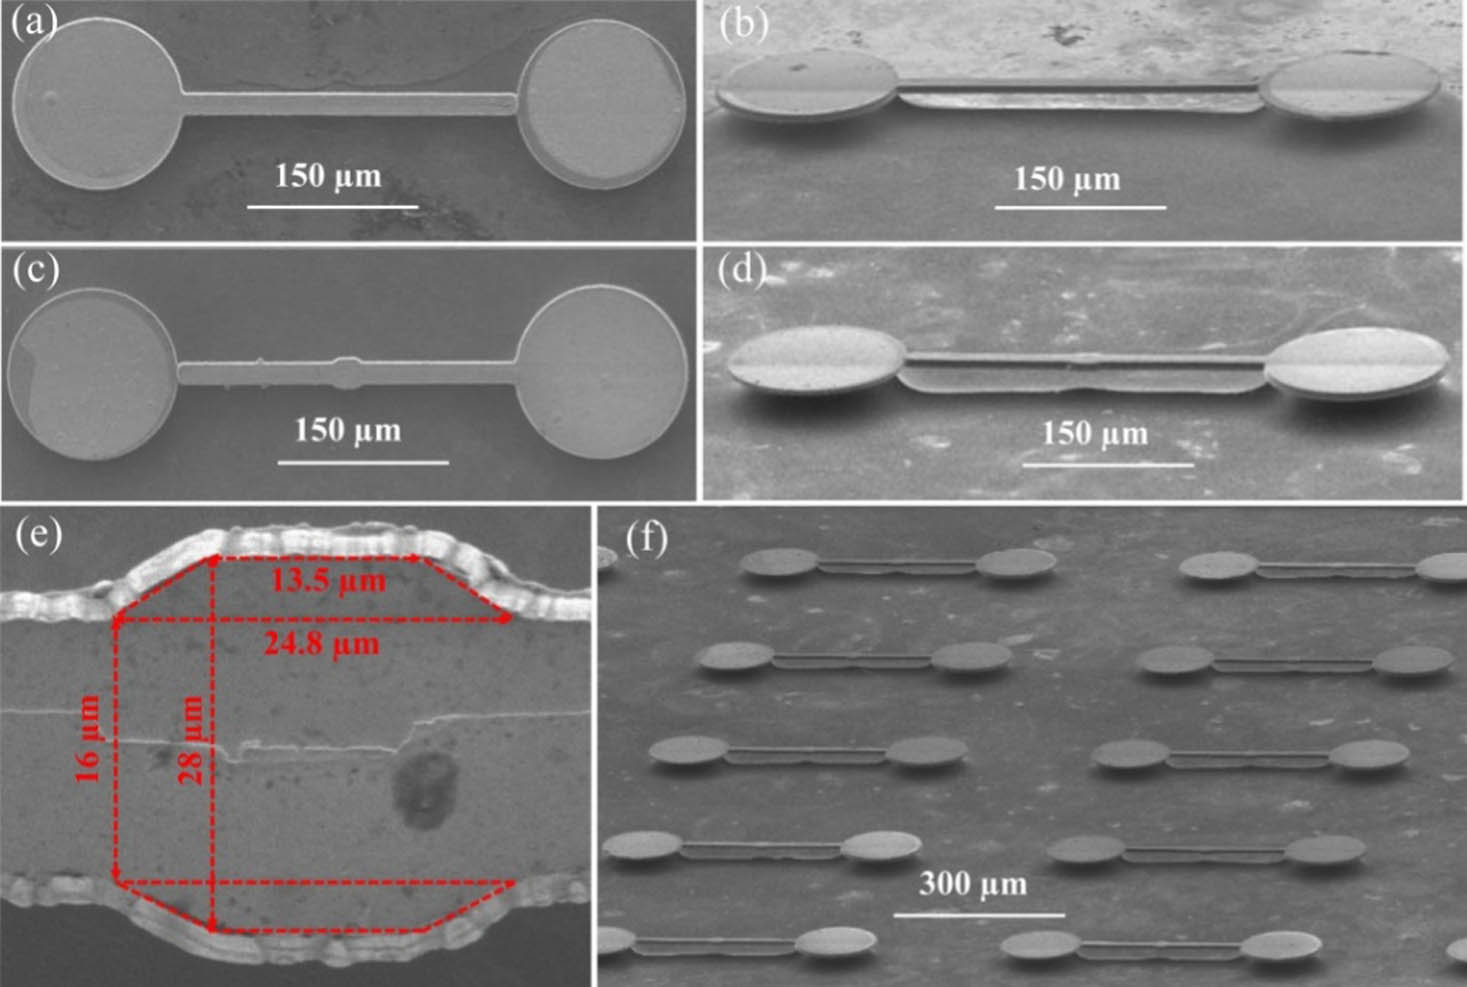 SEM images of GaN-LED accelerometer with beam structure. (a) Top view of type I device; (b) side view of type I device; (c) top view of type II device; (d) side view of type II device; (e) enlarged image of the top view of sensitive mass block; (f) array of type II device.